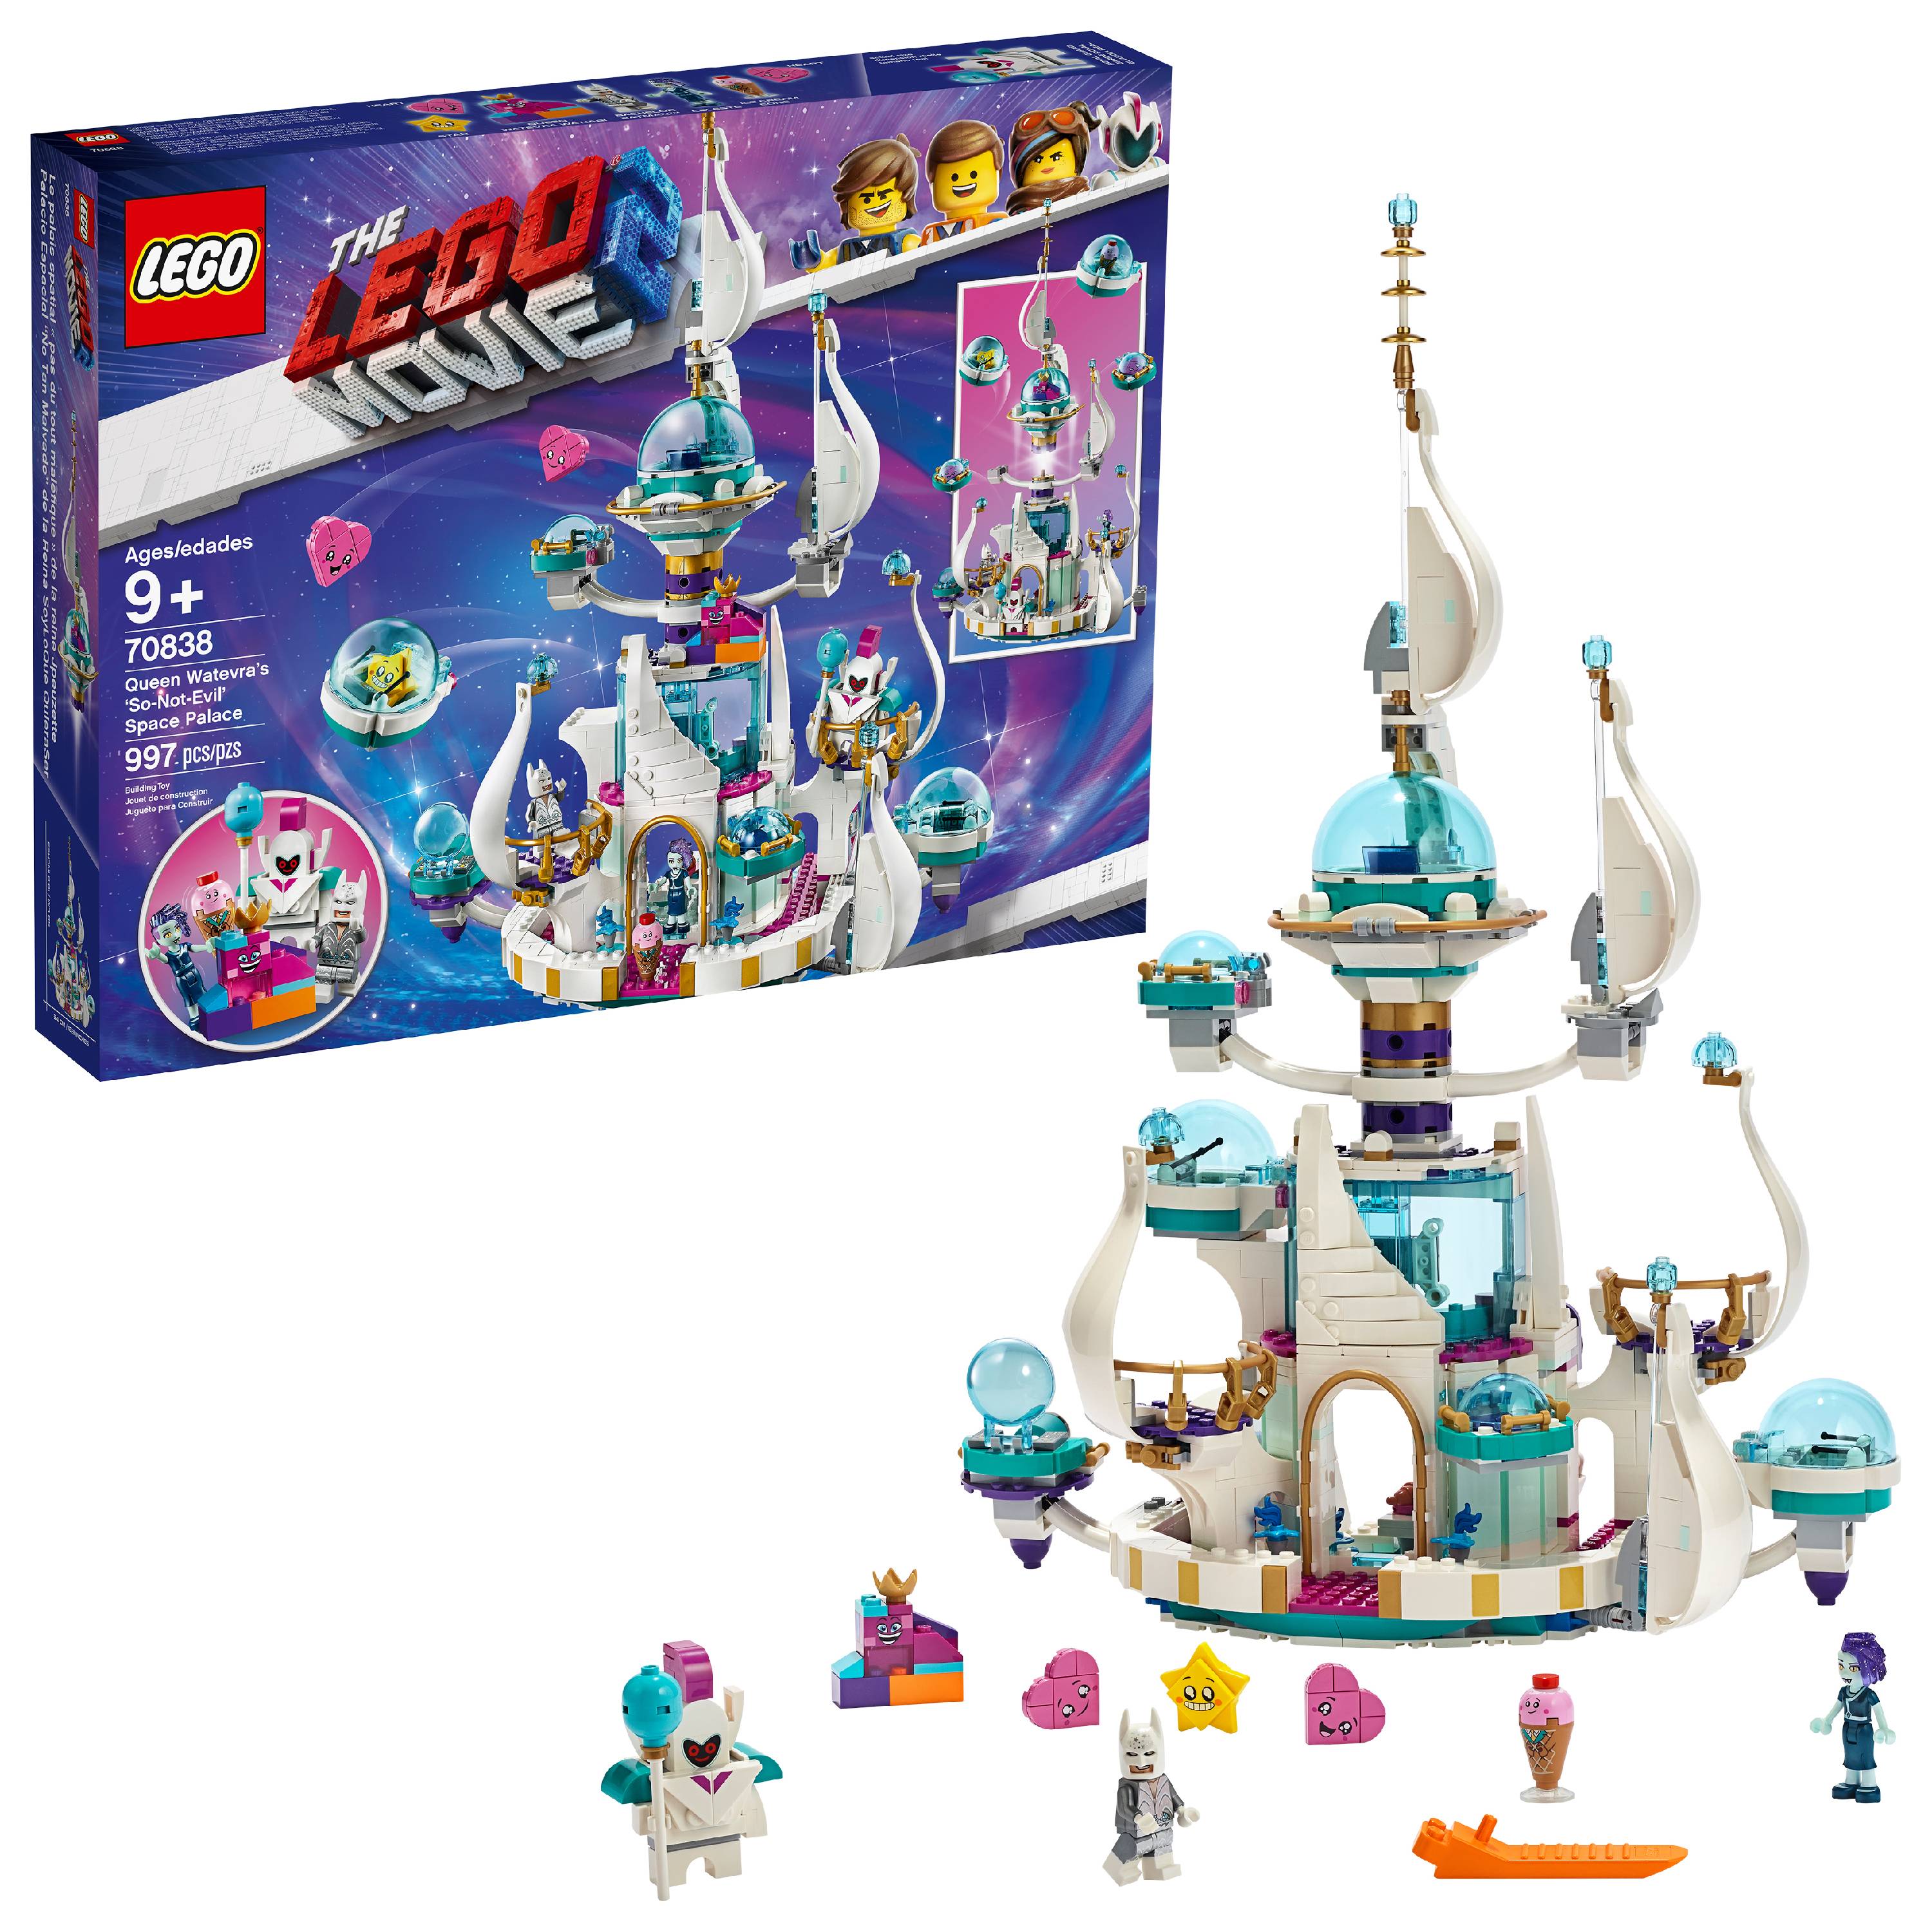 LEGO Movie Queen Watevra's So-Not-Evil' Space Pala 70838 - image 1 of 8